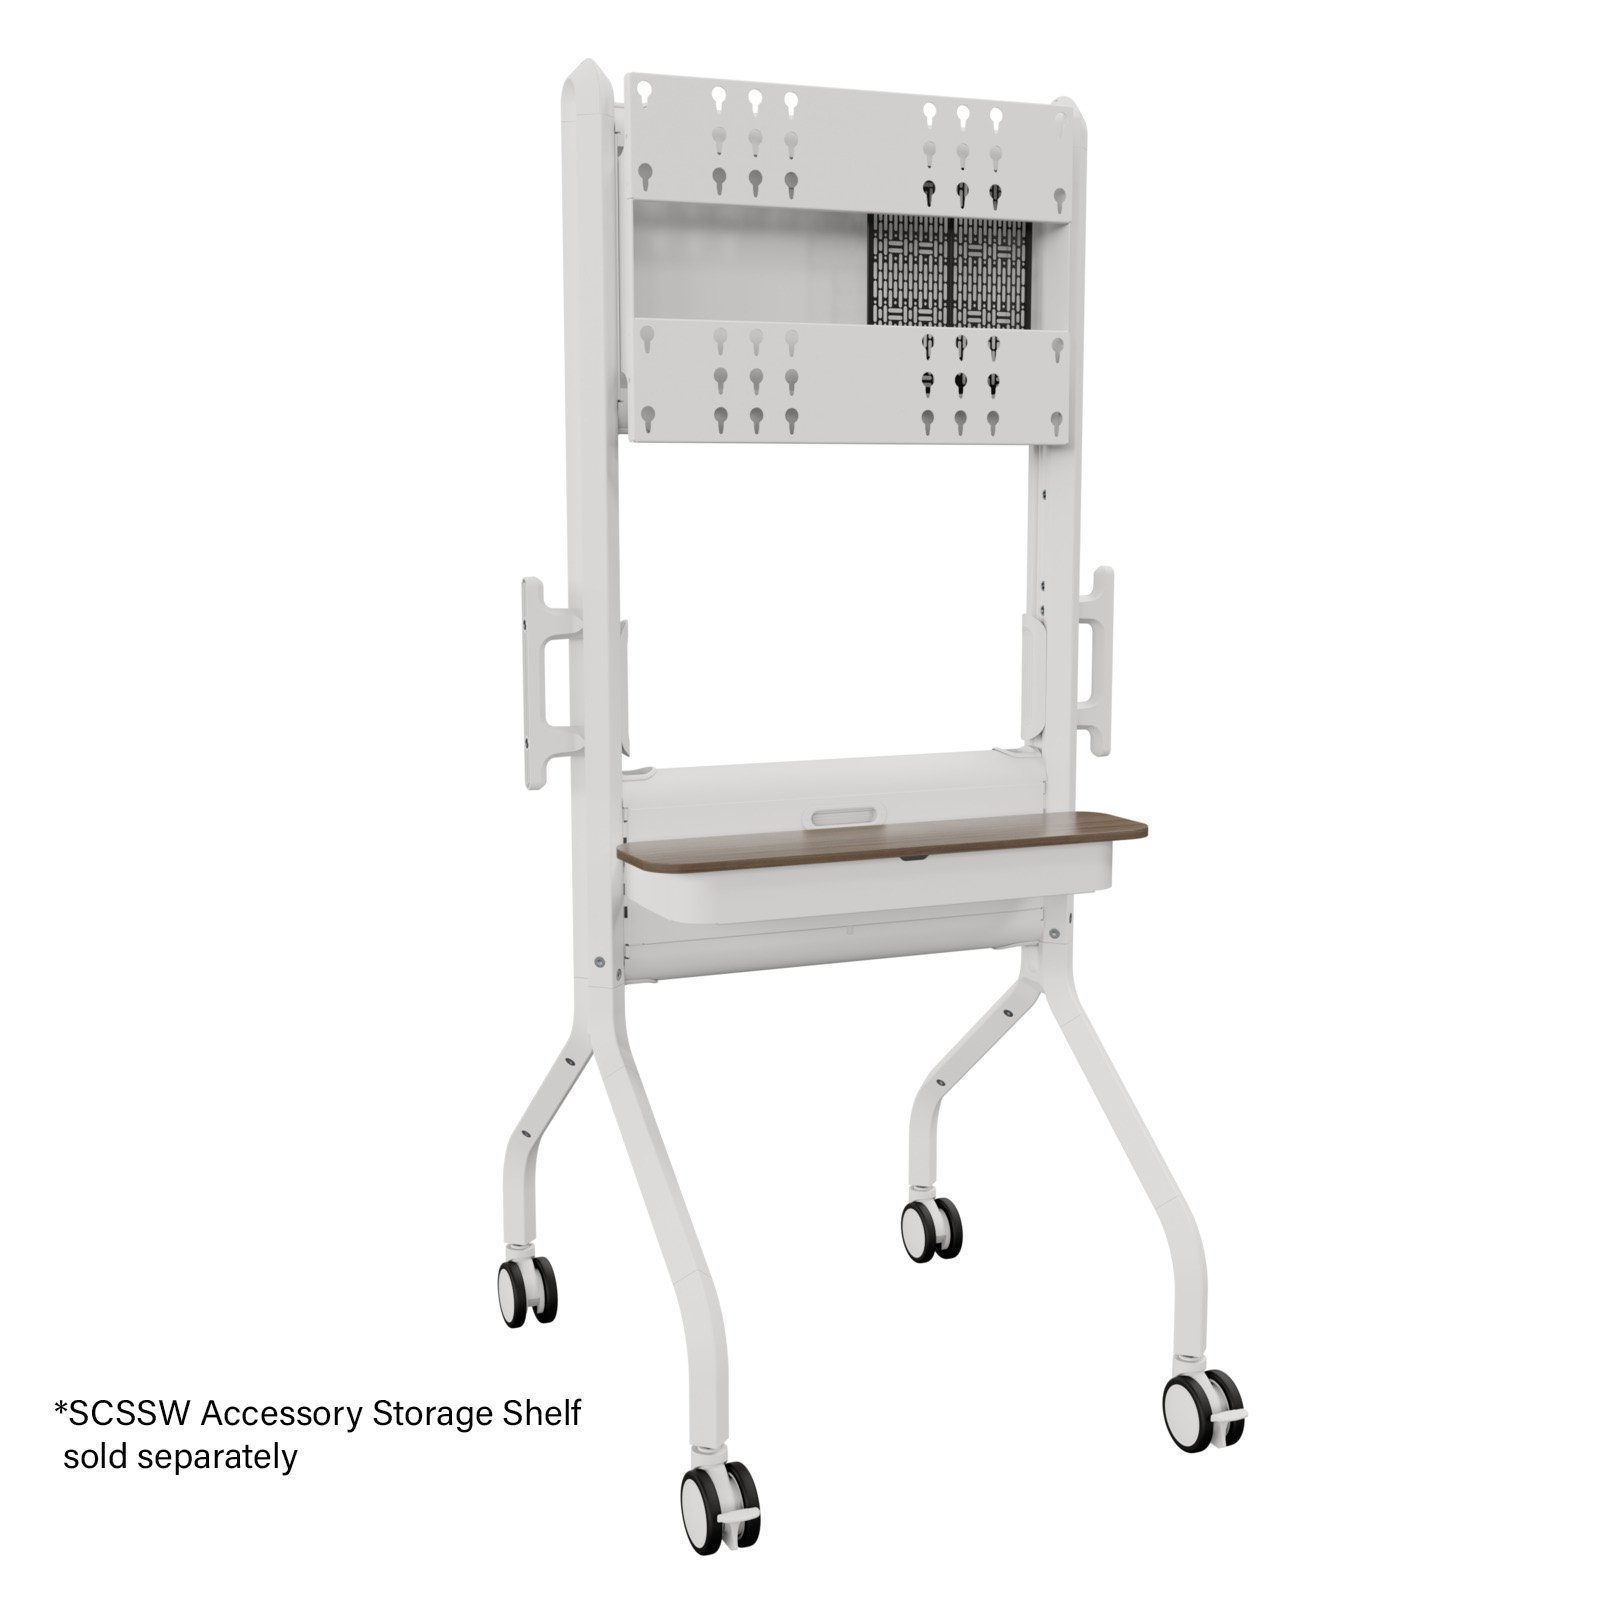 Chief LSCUB or LSCUW Voyager Manual Height Adjustable AV Cart